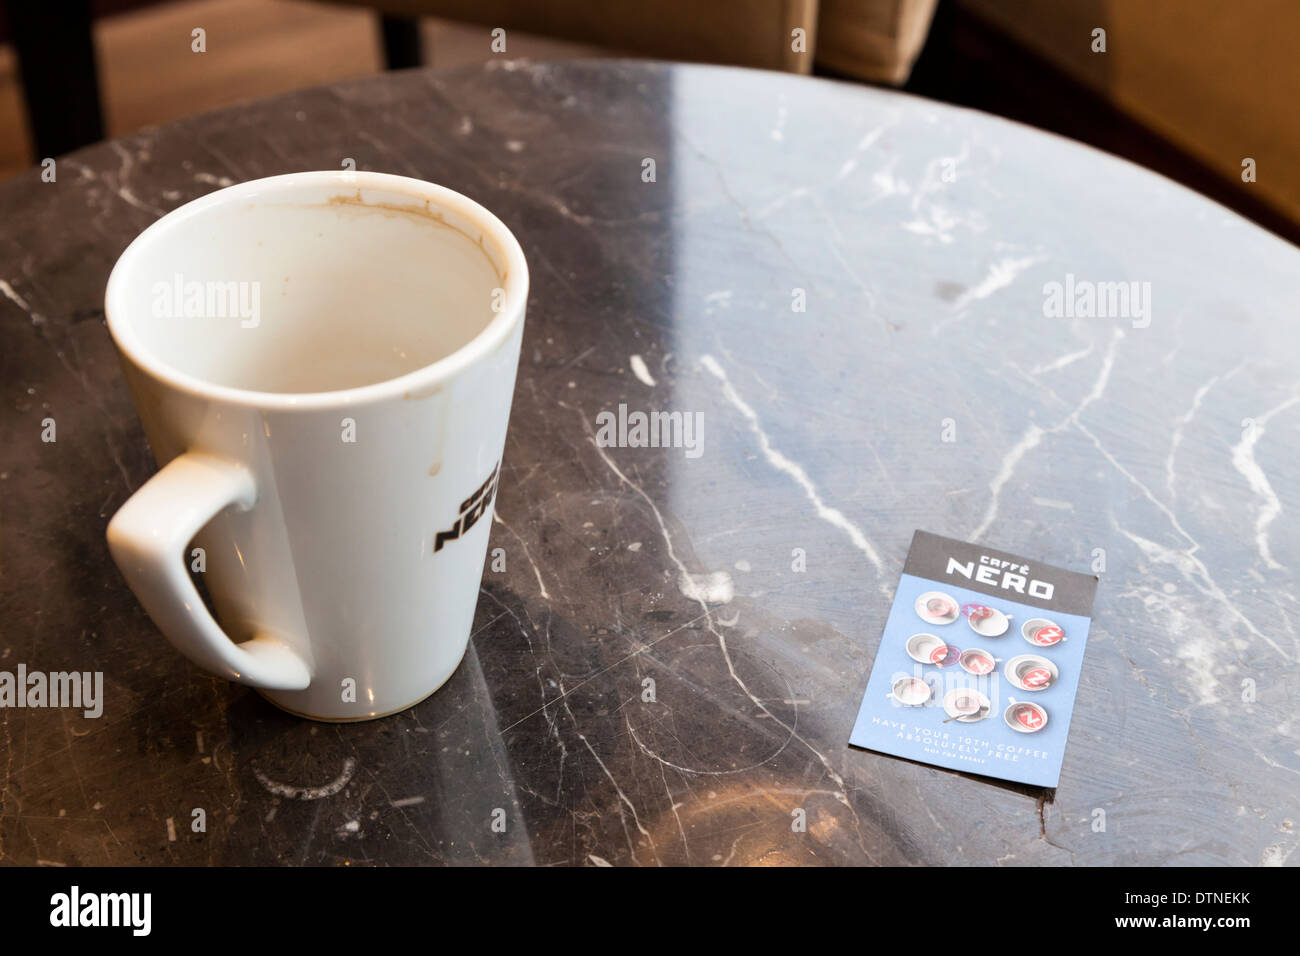 Full card. Caffe Nero loyalty card with all stamps filled in for a free cup, next to an empty mug of coffee Stock Photo